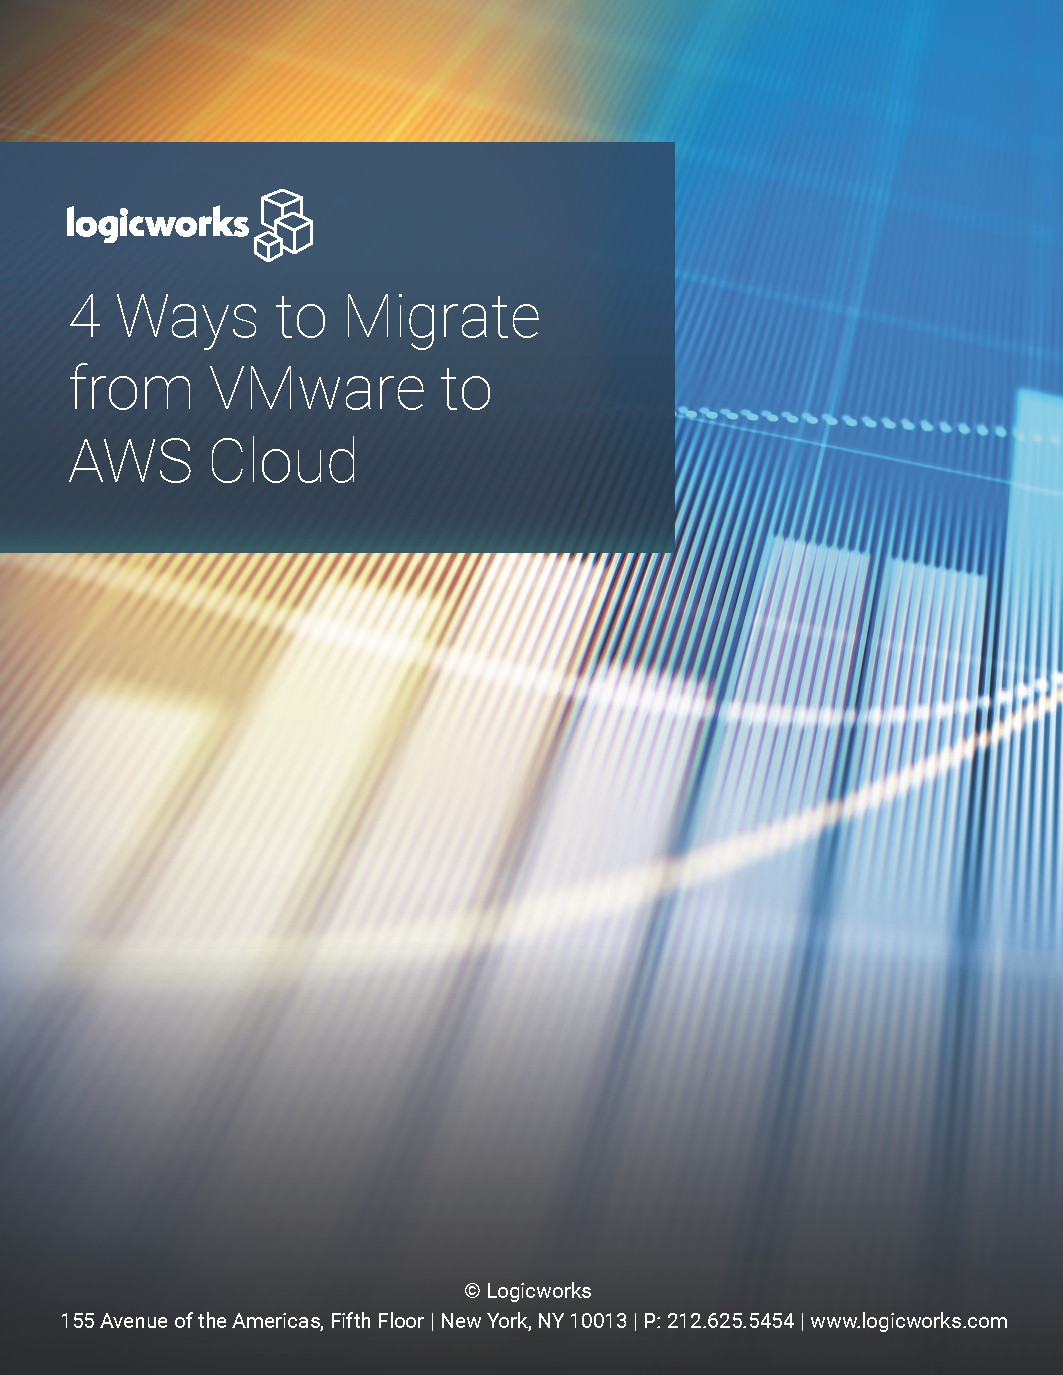 Logicworks eBook - 4 Ways to Migrate from VMware to AWS